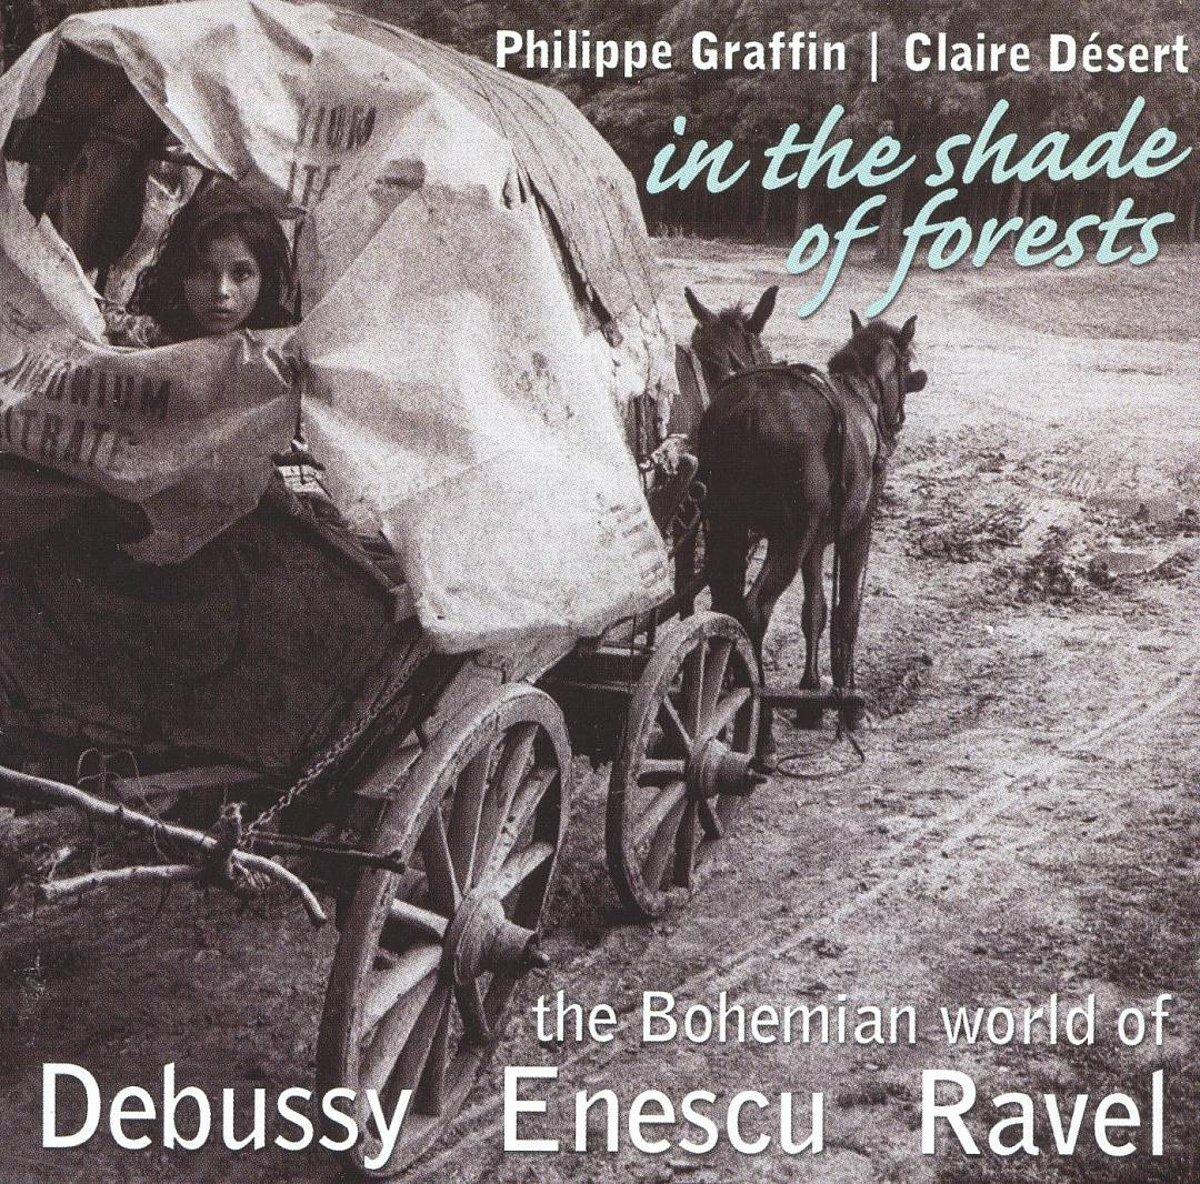 DEBUSSY / ENESCU / RAVEL - IN THE SHADE OF FORESTS - The Bohemian world of Debussy, Enescu, Ravel